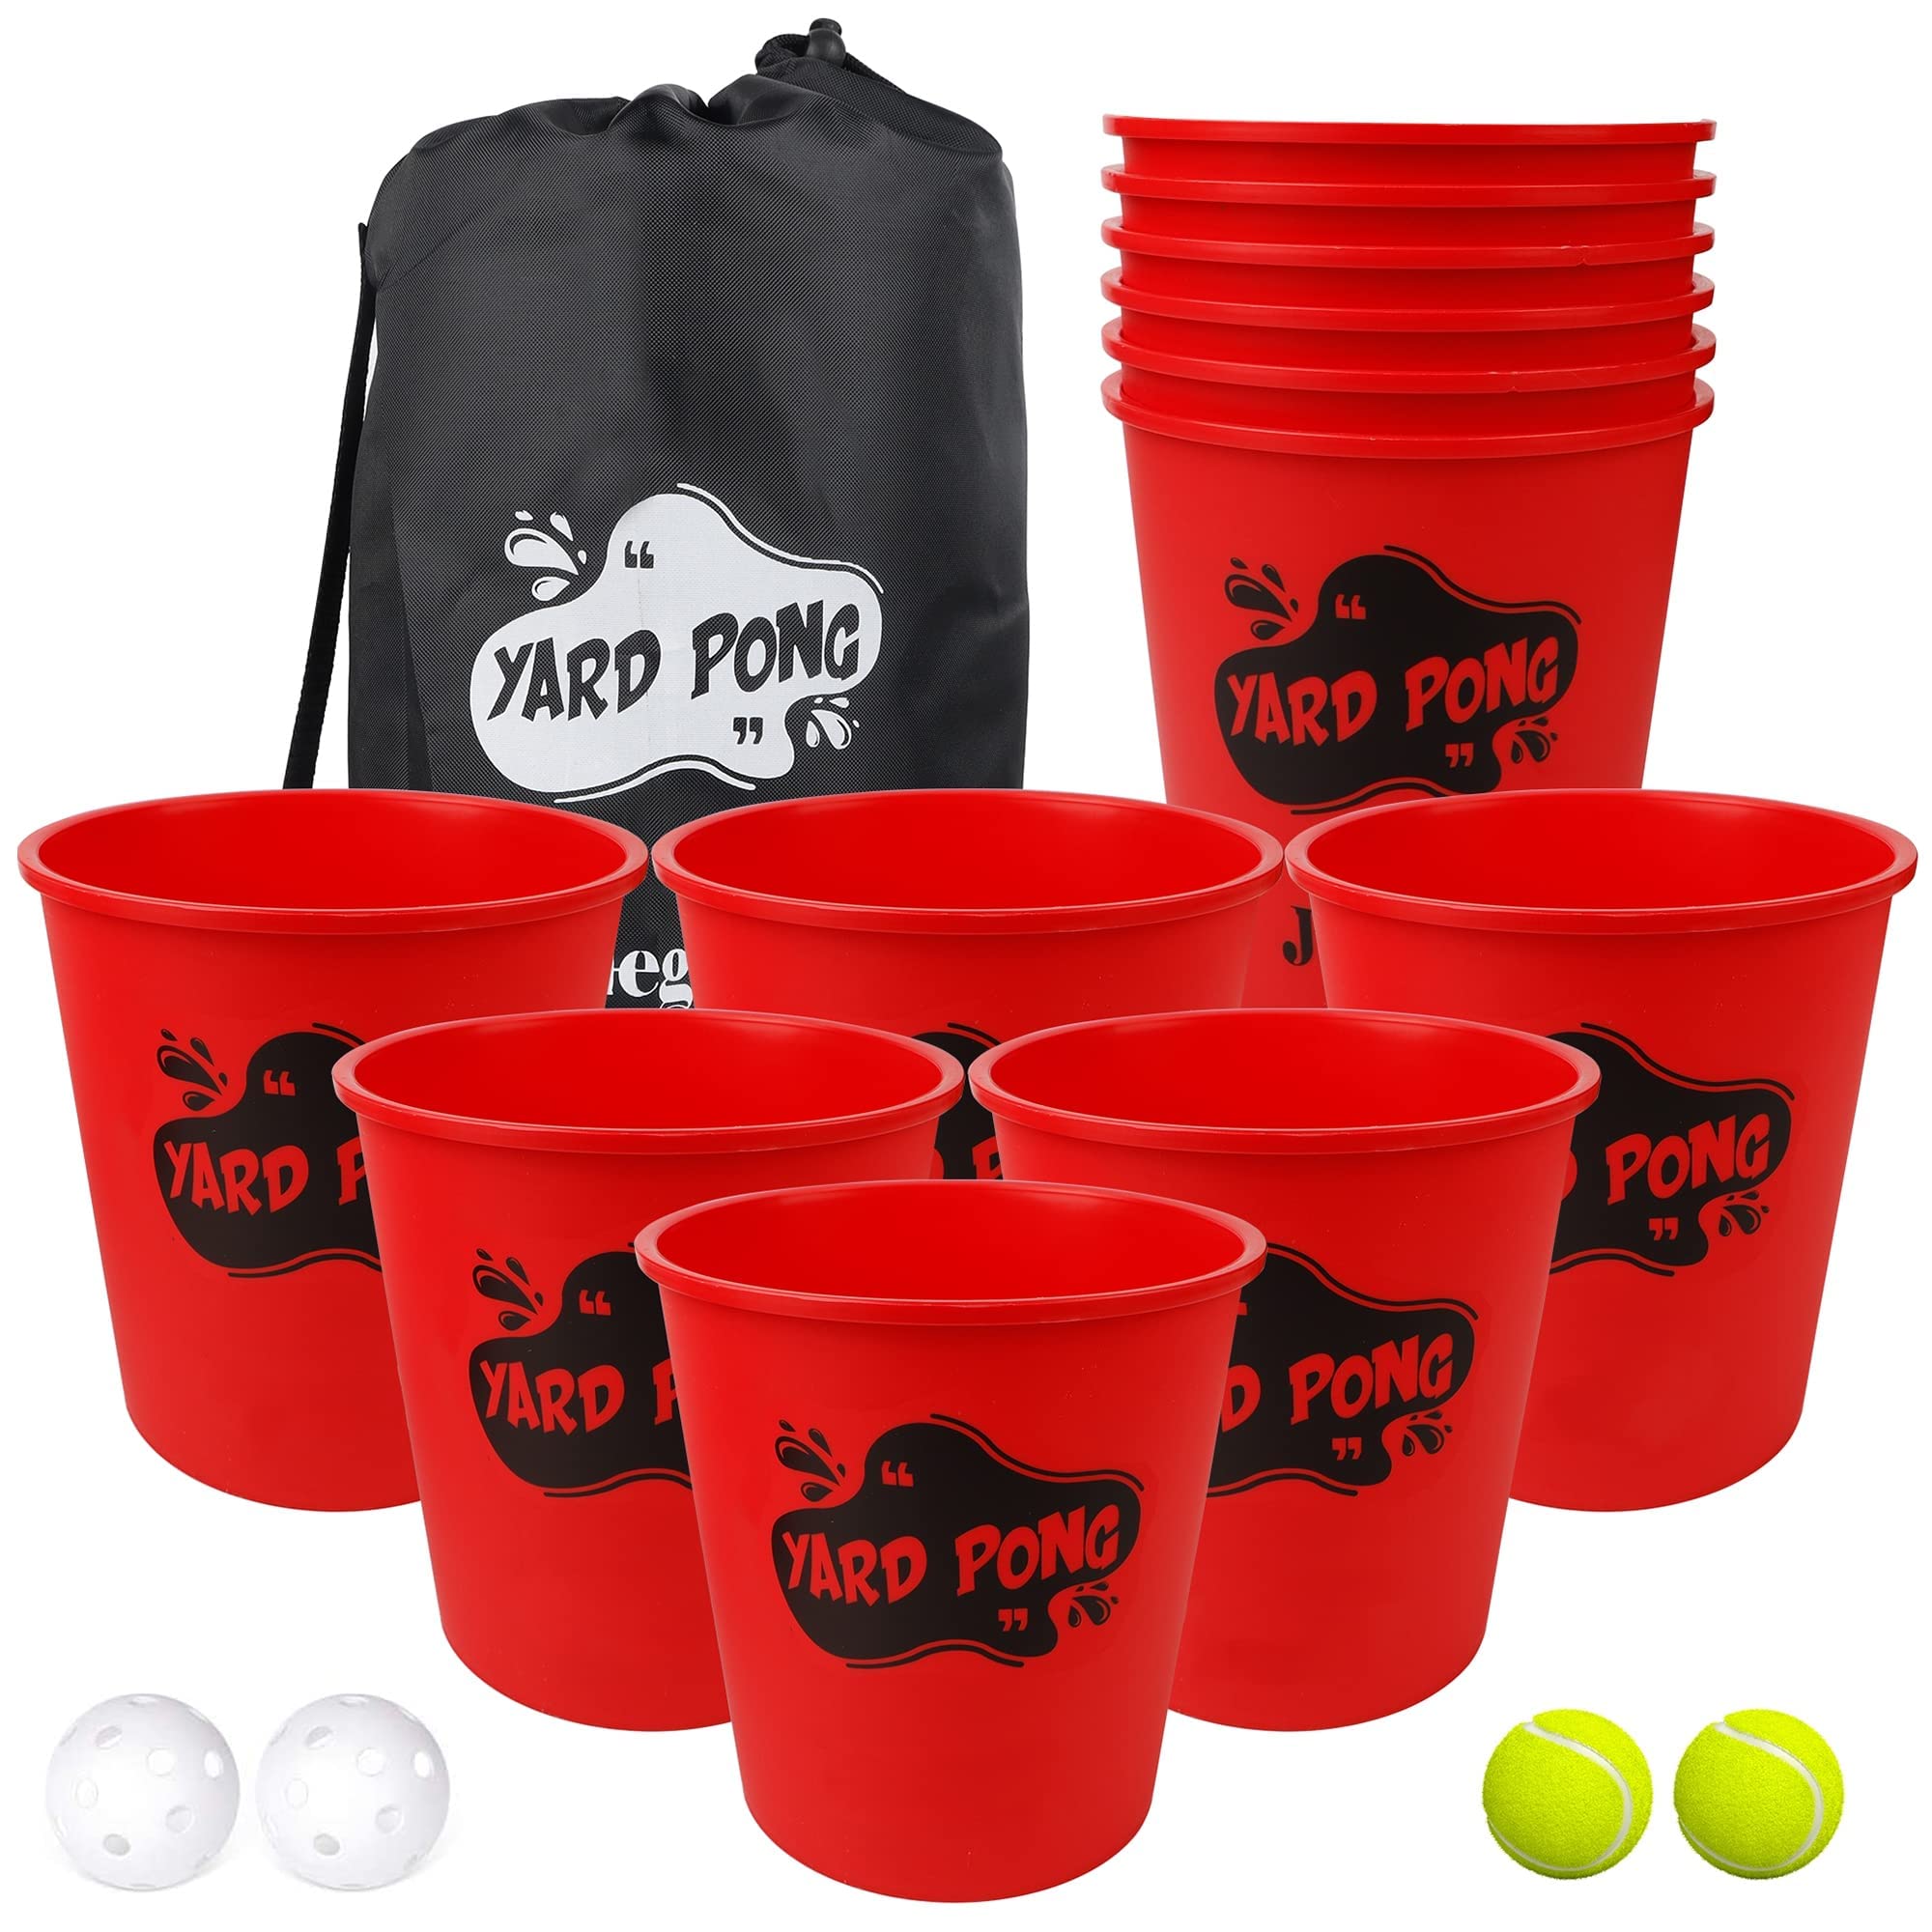 Juegoal Outdoor Yard Games Set with Durable Buckets and Balls, Toss Game Throwing Game for Beach, Camping, Lawn and Backyard